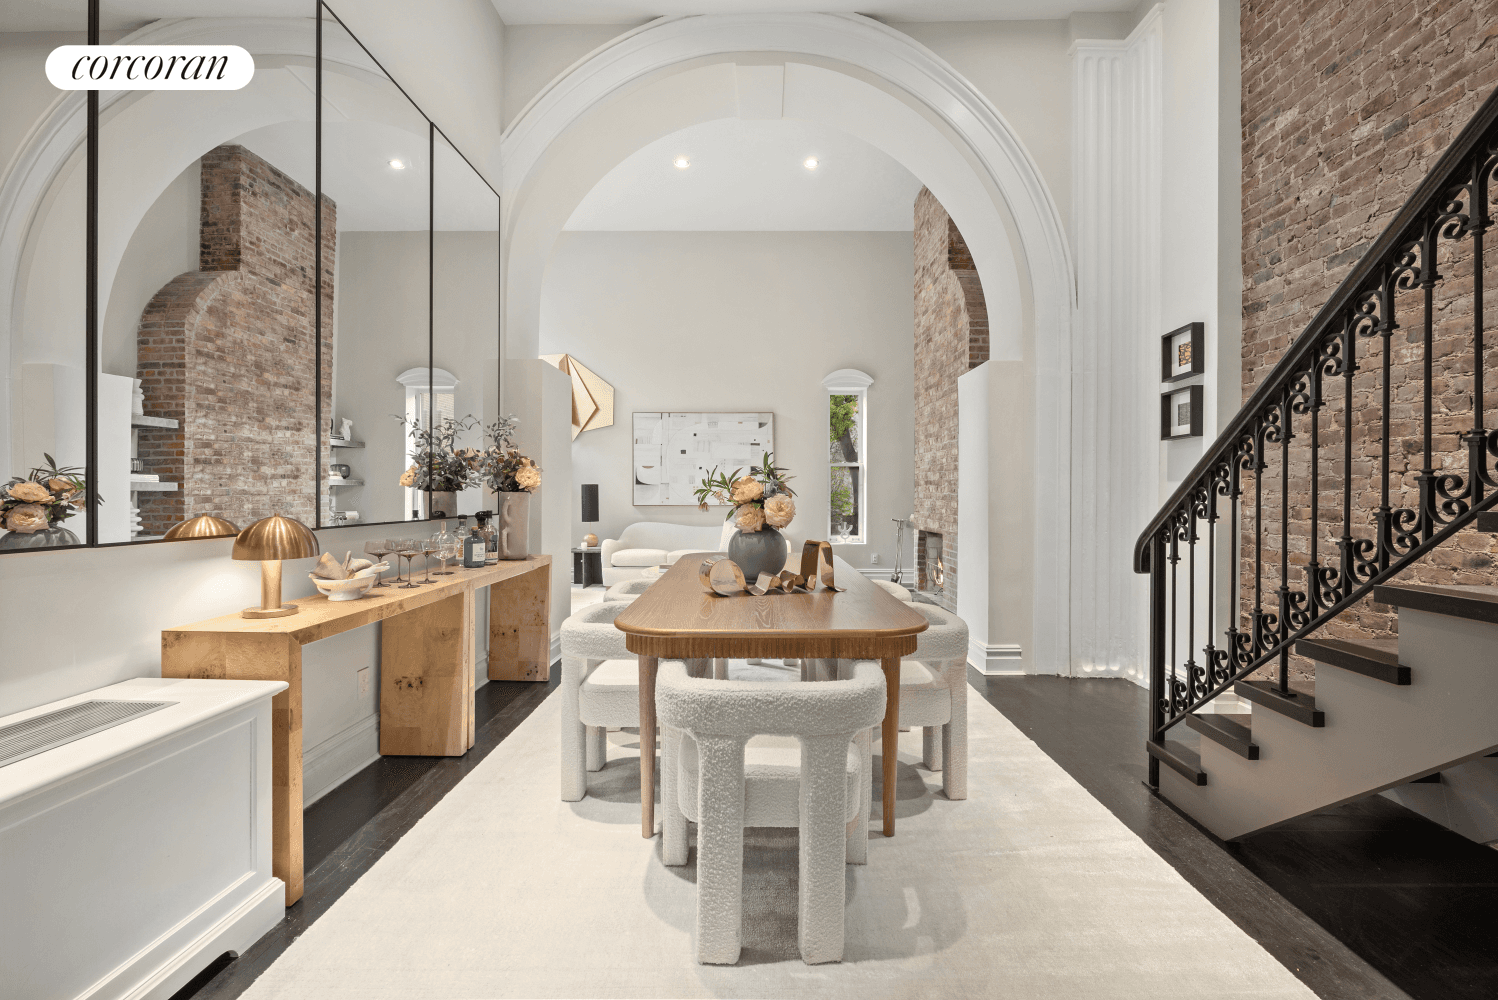 Welcome home to your turn key Greenwich Village architectural dream home.